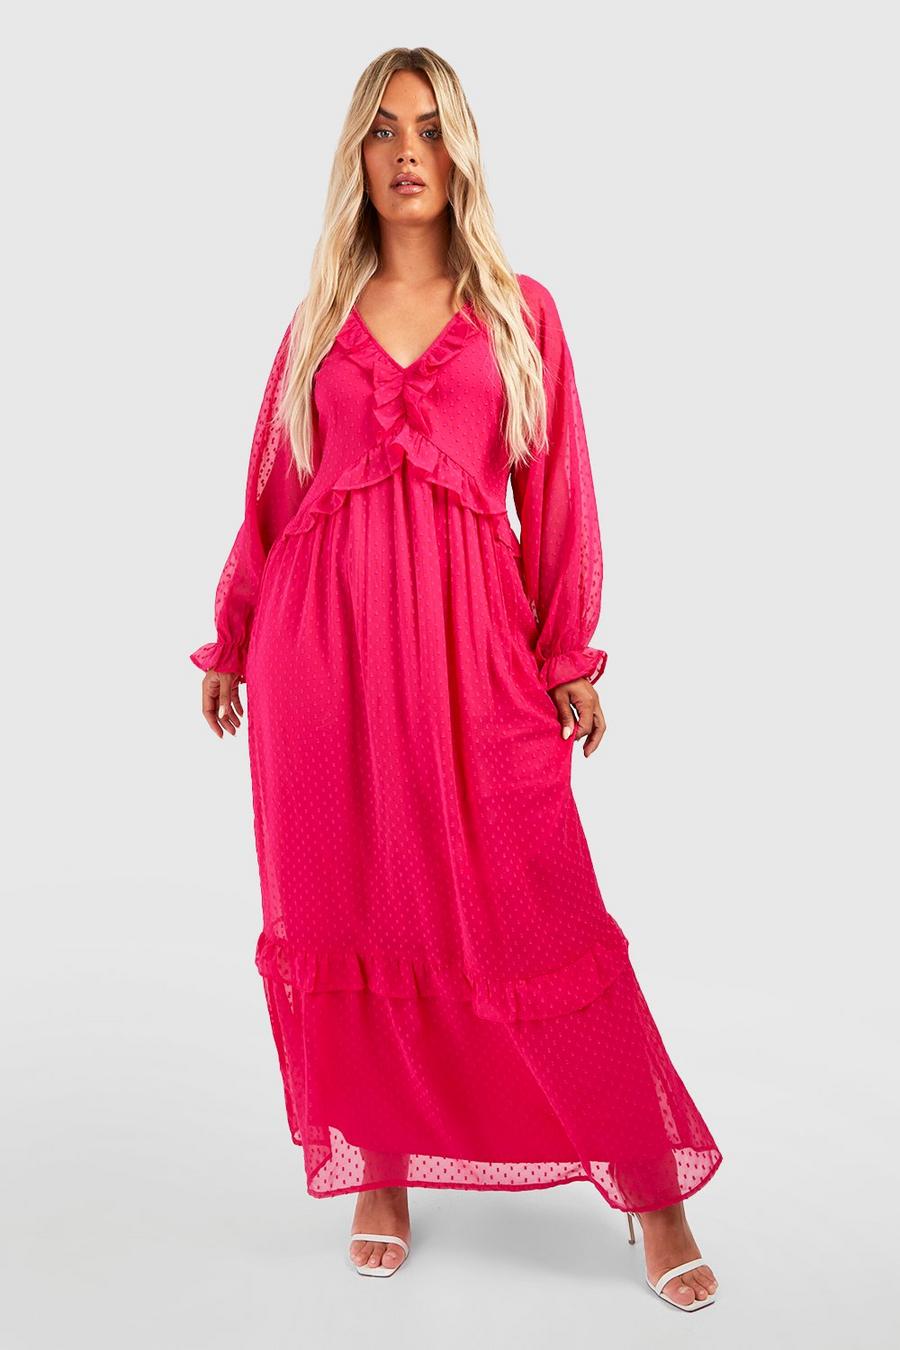 Grande taille - Robe longue à volants, Hot pink image number 1